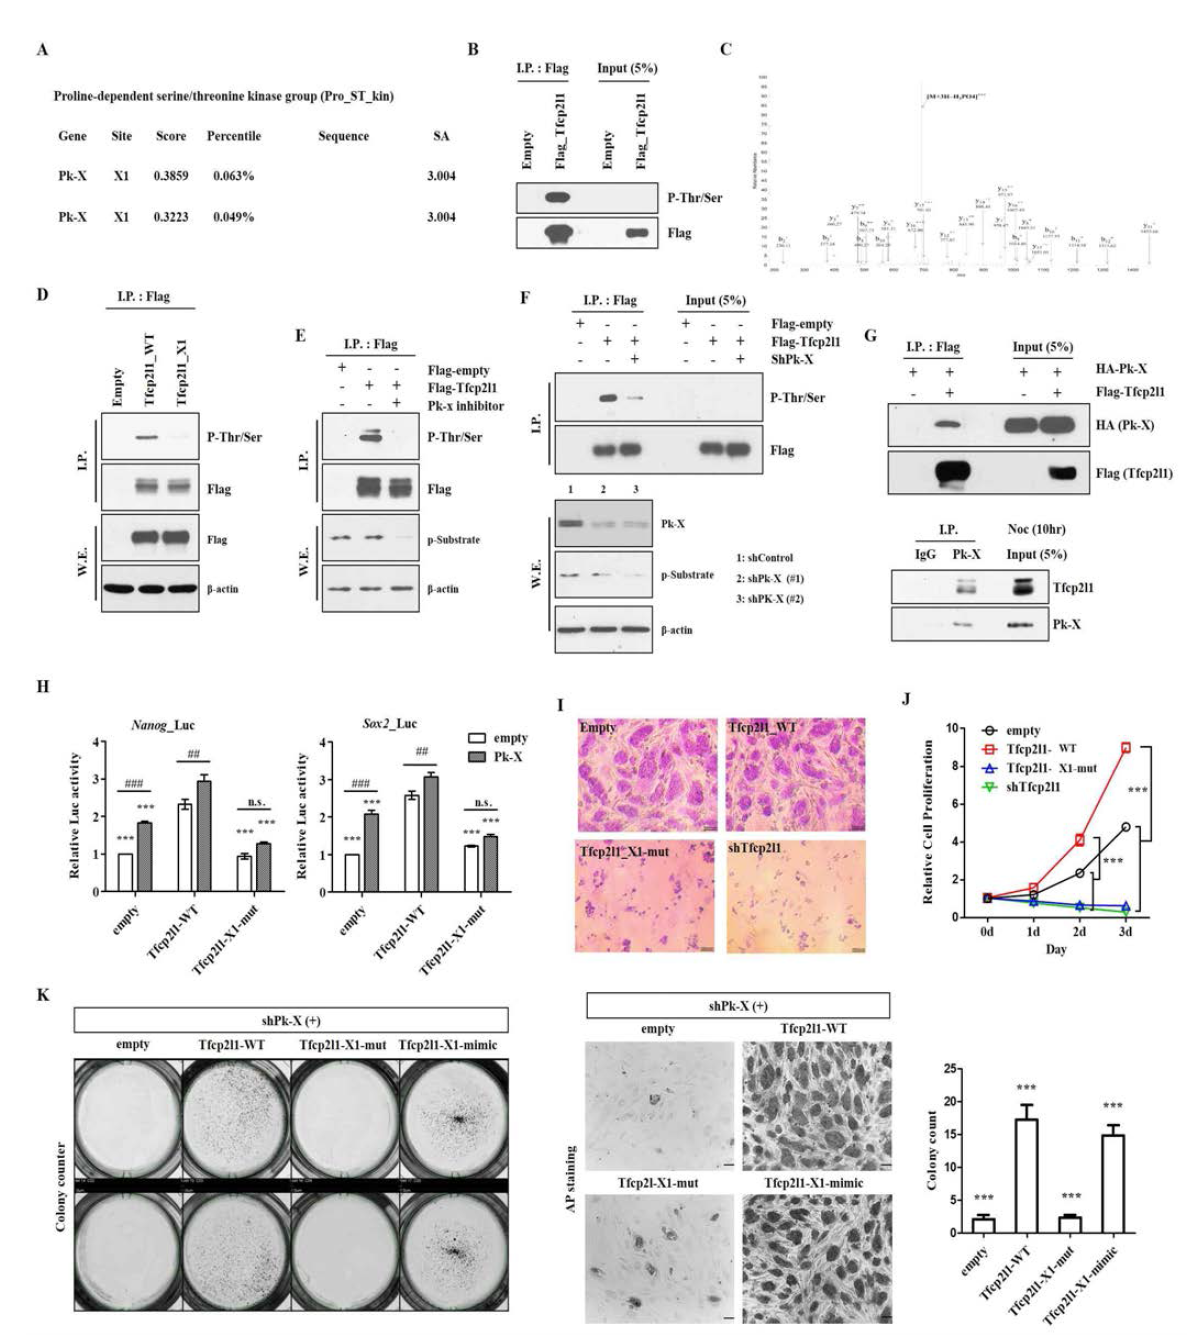 Phoshorylation of Tfcp2l1 regulates the pluripotency and proliferation of mouse ESC